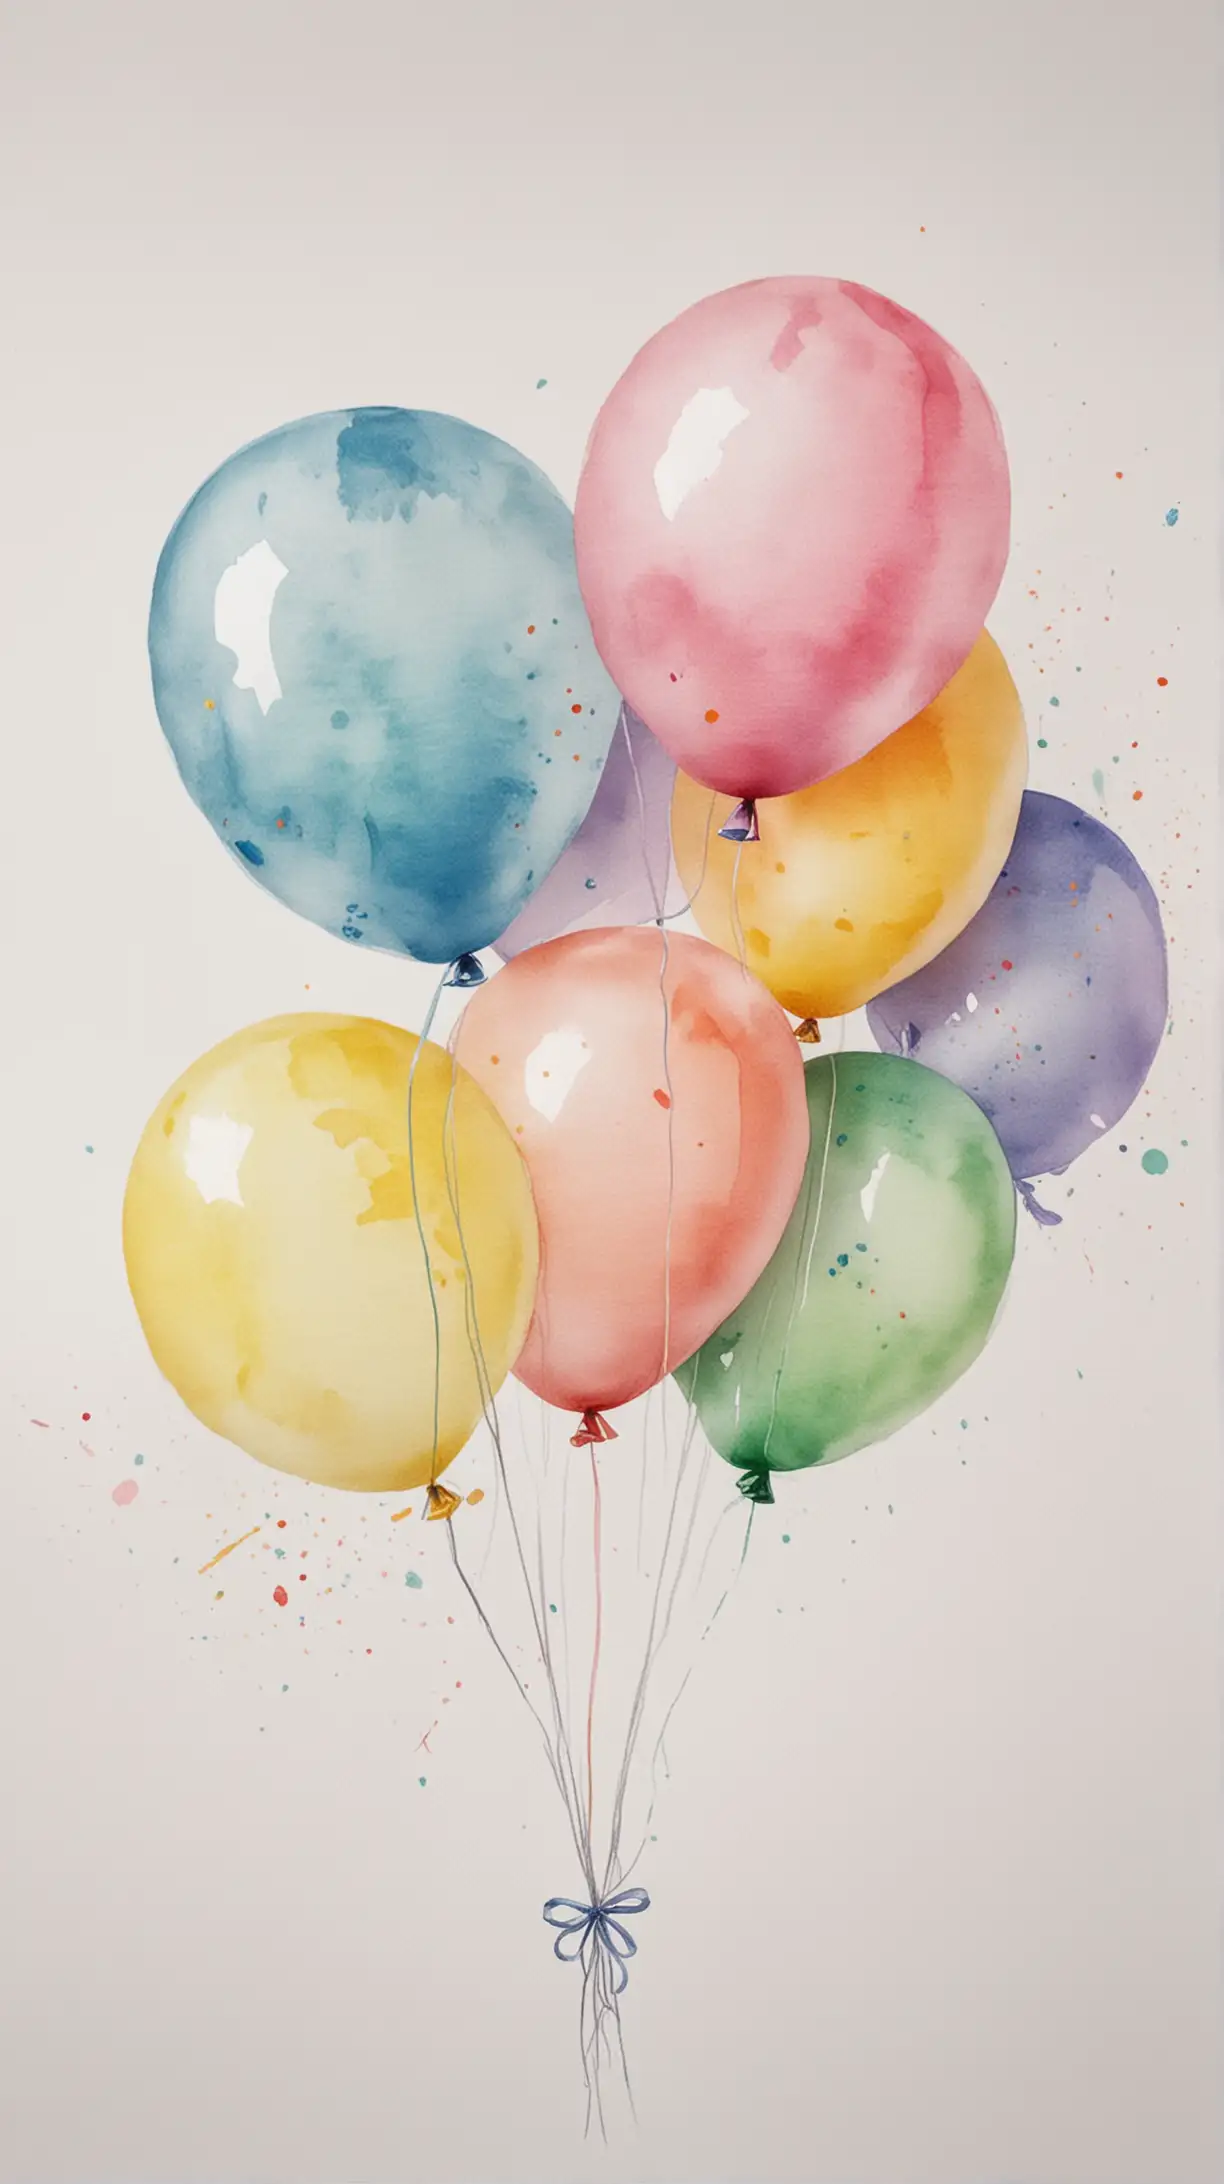 Colorful Watercolor Pastel Balloons Floating on White Background